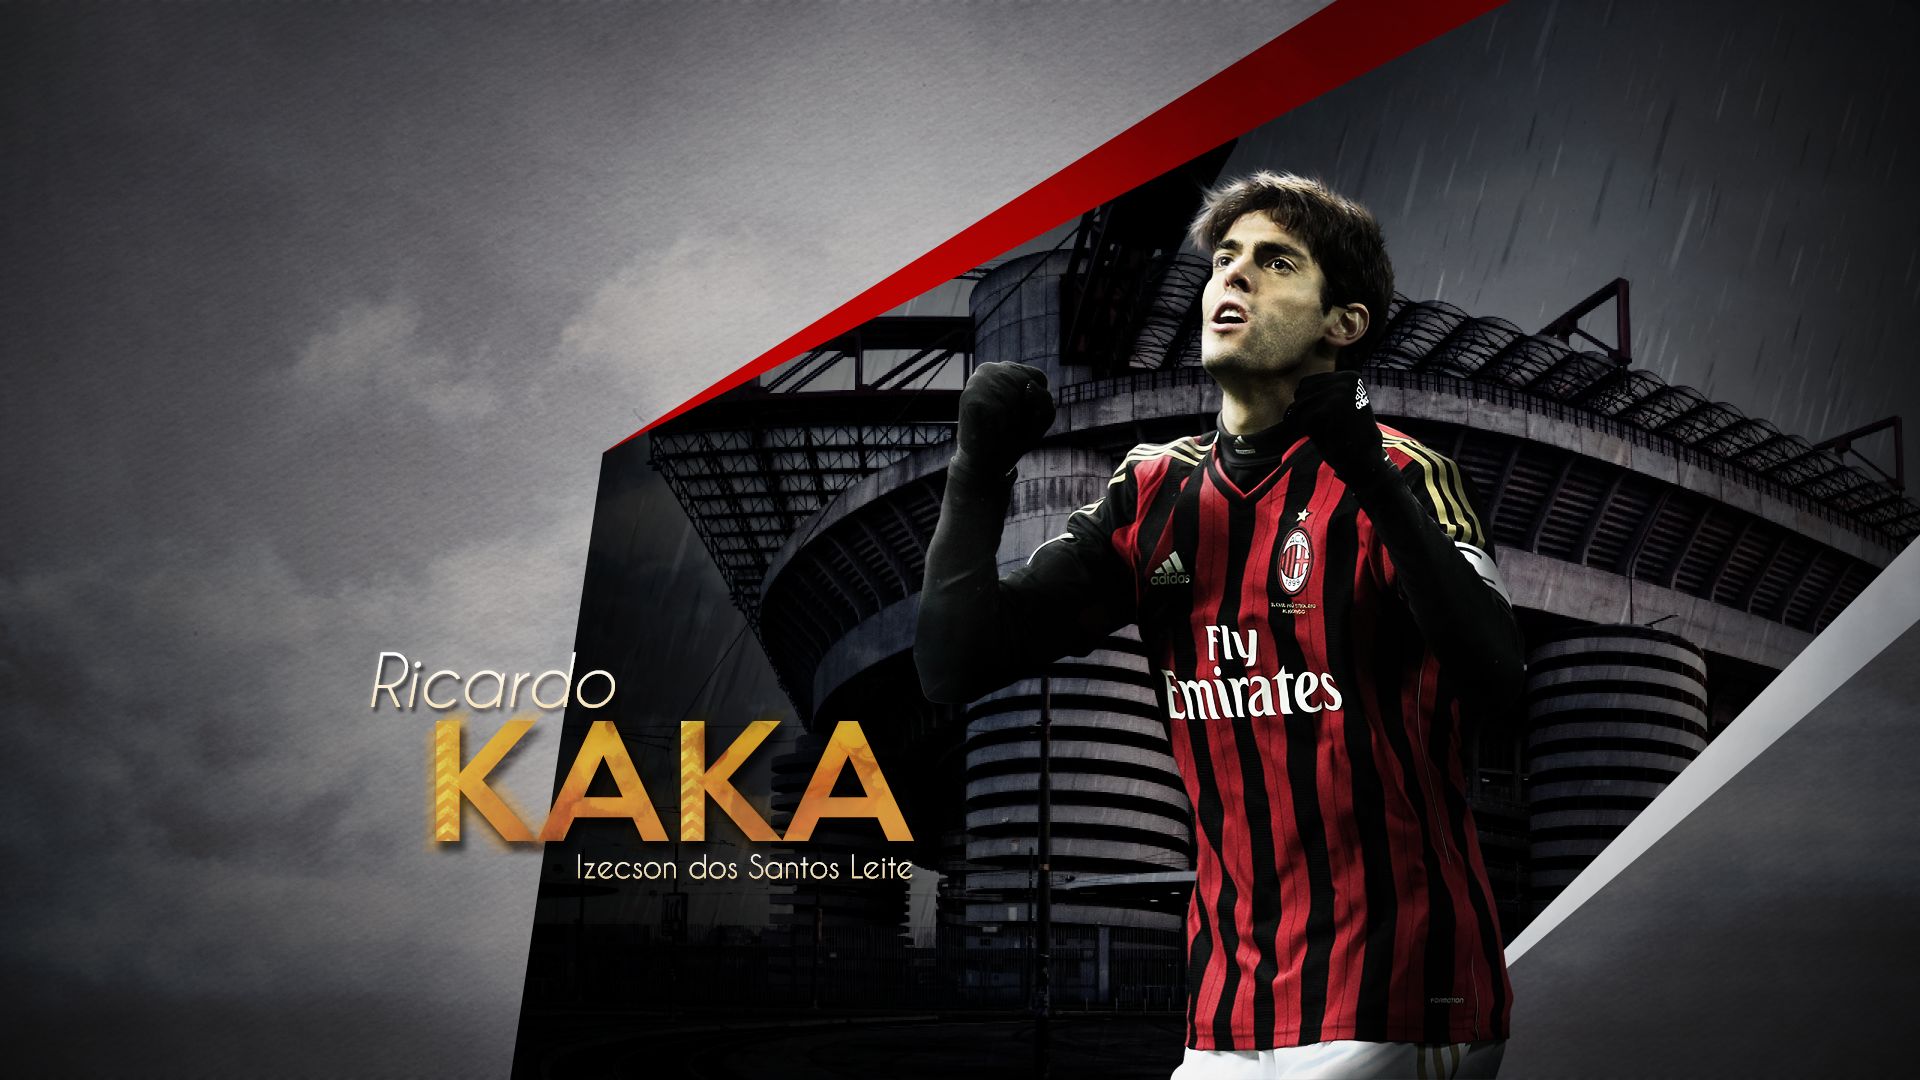 Free download Kaka Wallpaper 12 Football Wallpapers and Videos [1024x768]  for your Desktop, Mobile & Tablet | Explore 76+ Kaka Footballer Wallpaper |  Wallpaper Of Kaka, Kaka Wallpapers, Wallpapers Of Kaka